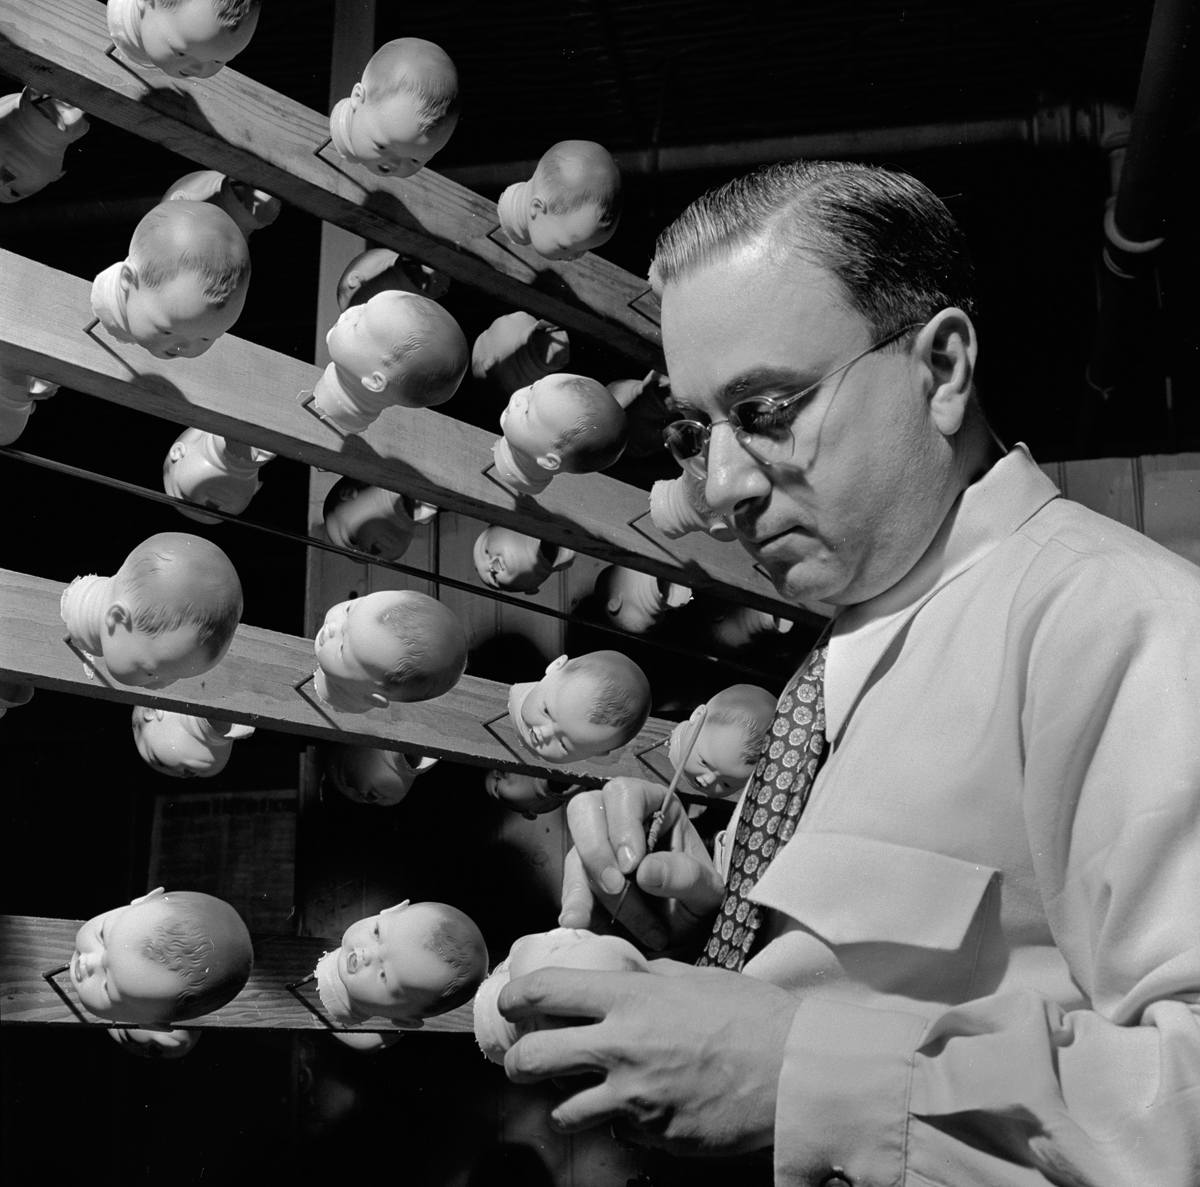 circa 1955: A factory worker painting the heads of plastic dolls in preparation for the Christmas trade. (Photo by Evans/Three Lions/Getty Images)